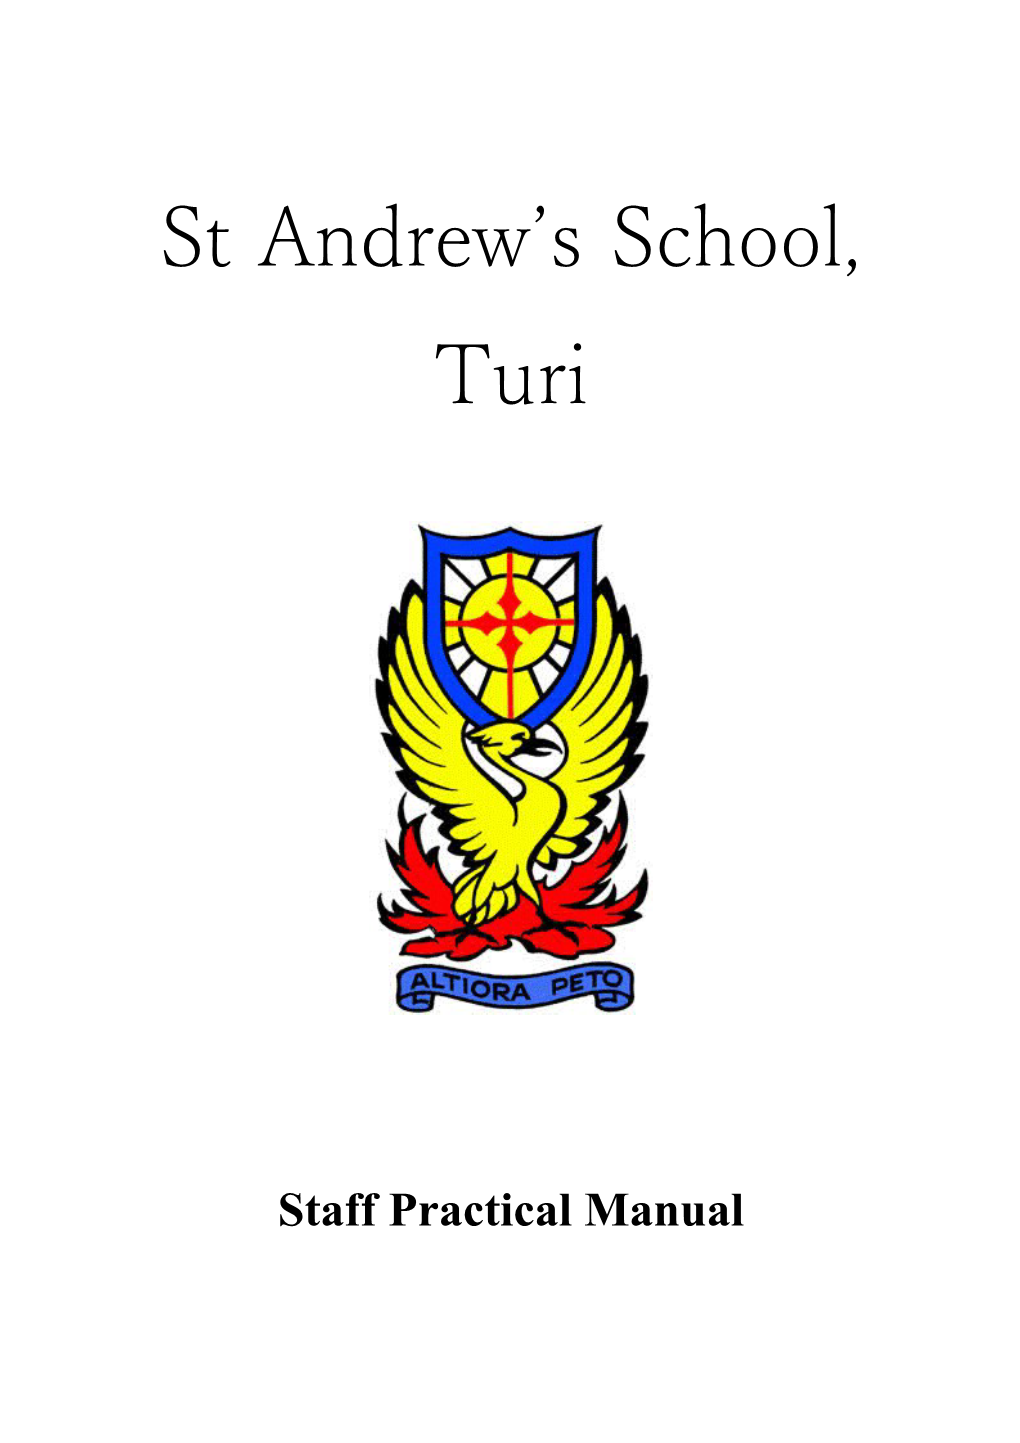 The Practical Aspects of Living and Working at St Andrew S, Turi